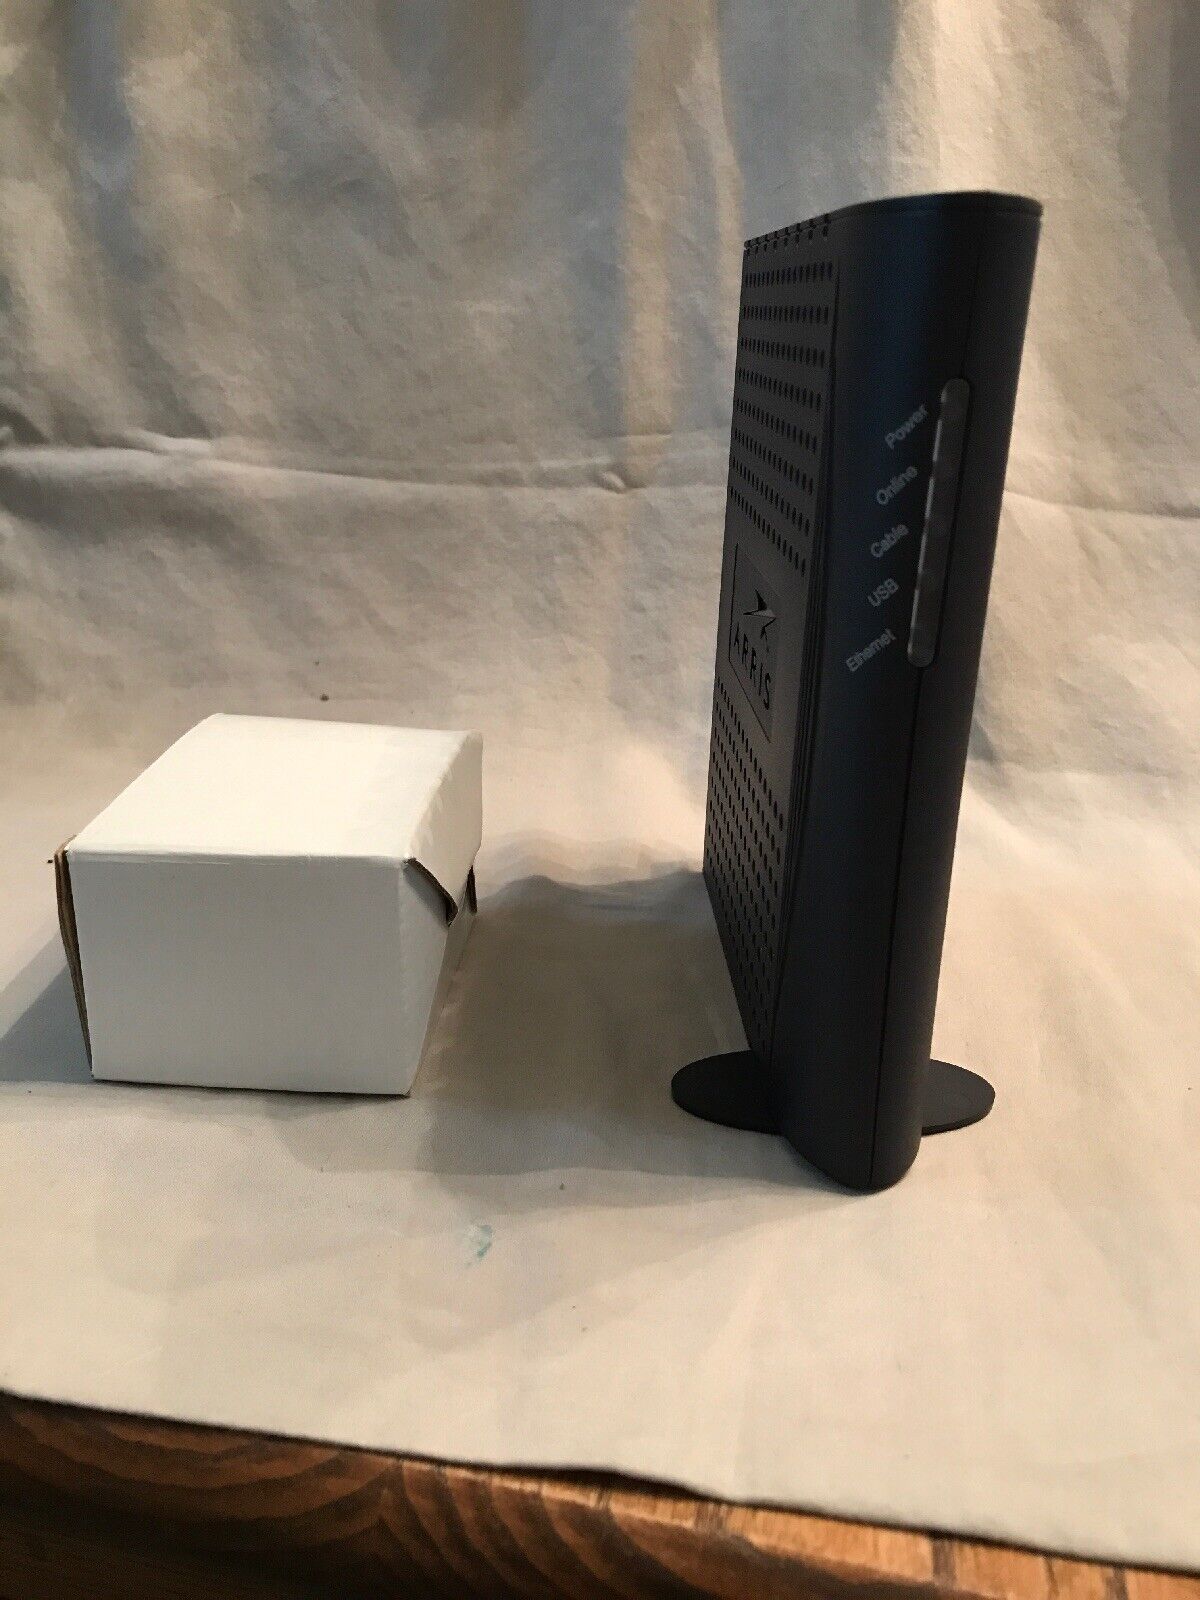 Arris Touchstone CM450A/CE 713890 Cable Modem Open Box. Untested Powers Up.